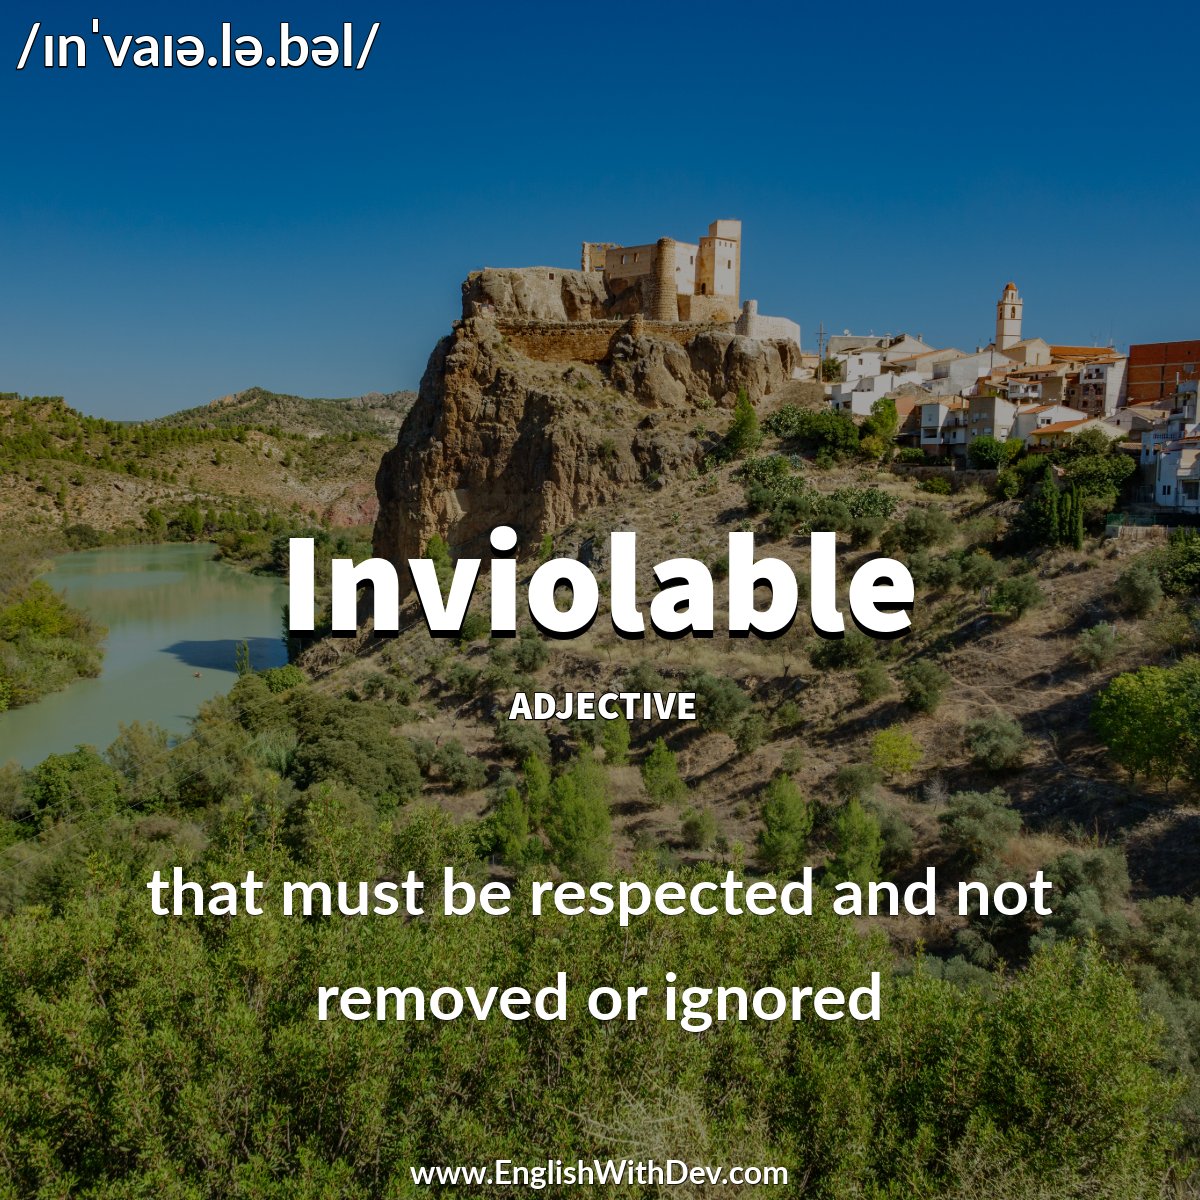 Inviolable (🗣️ ɪnˈvaɪə.lə.bəl) - that must be respected and not removed or ignored

Example - Everyone has an inviolable right to protection by a fair legal system.

#EnglishWithDev #learnenglish #english #words #wordoftheweek #Inviolable #wordoftheday